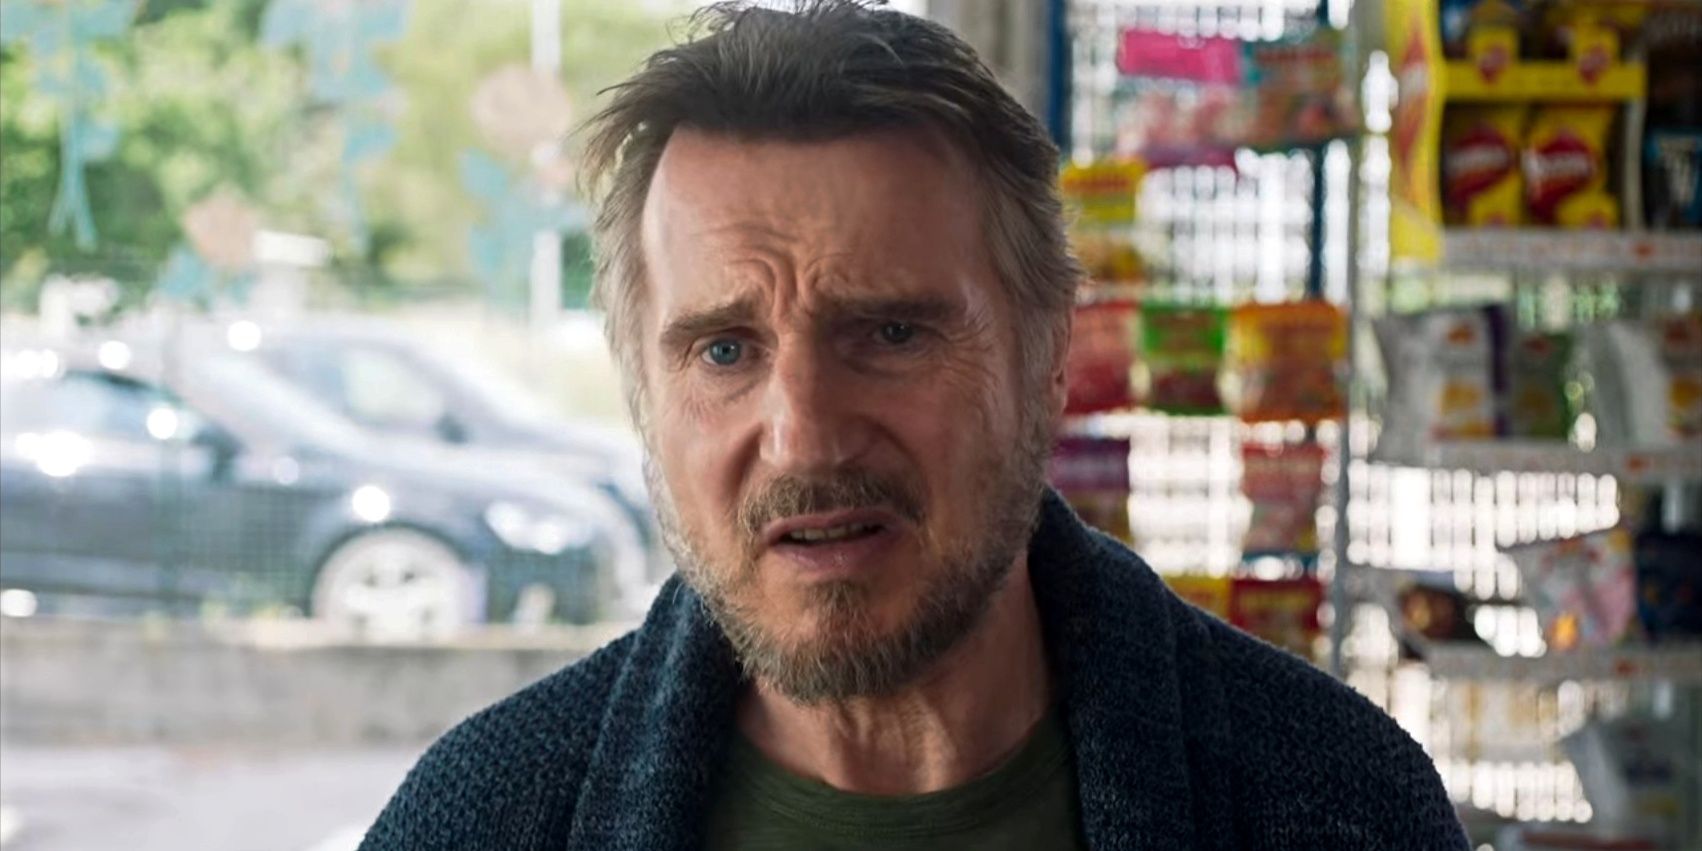 Liam Neeson as Robert Foster in Made in Italy.